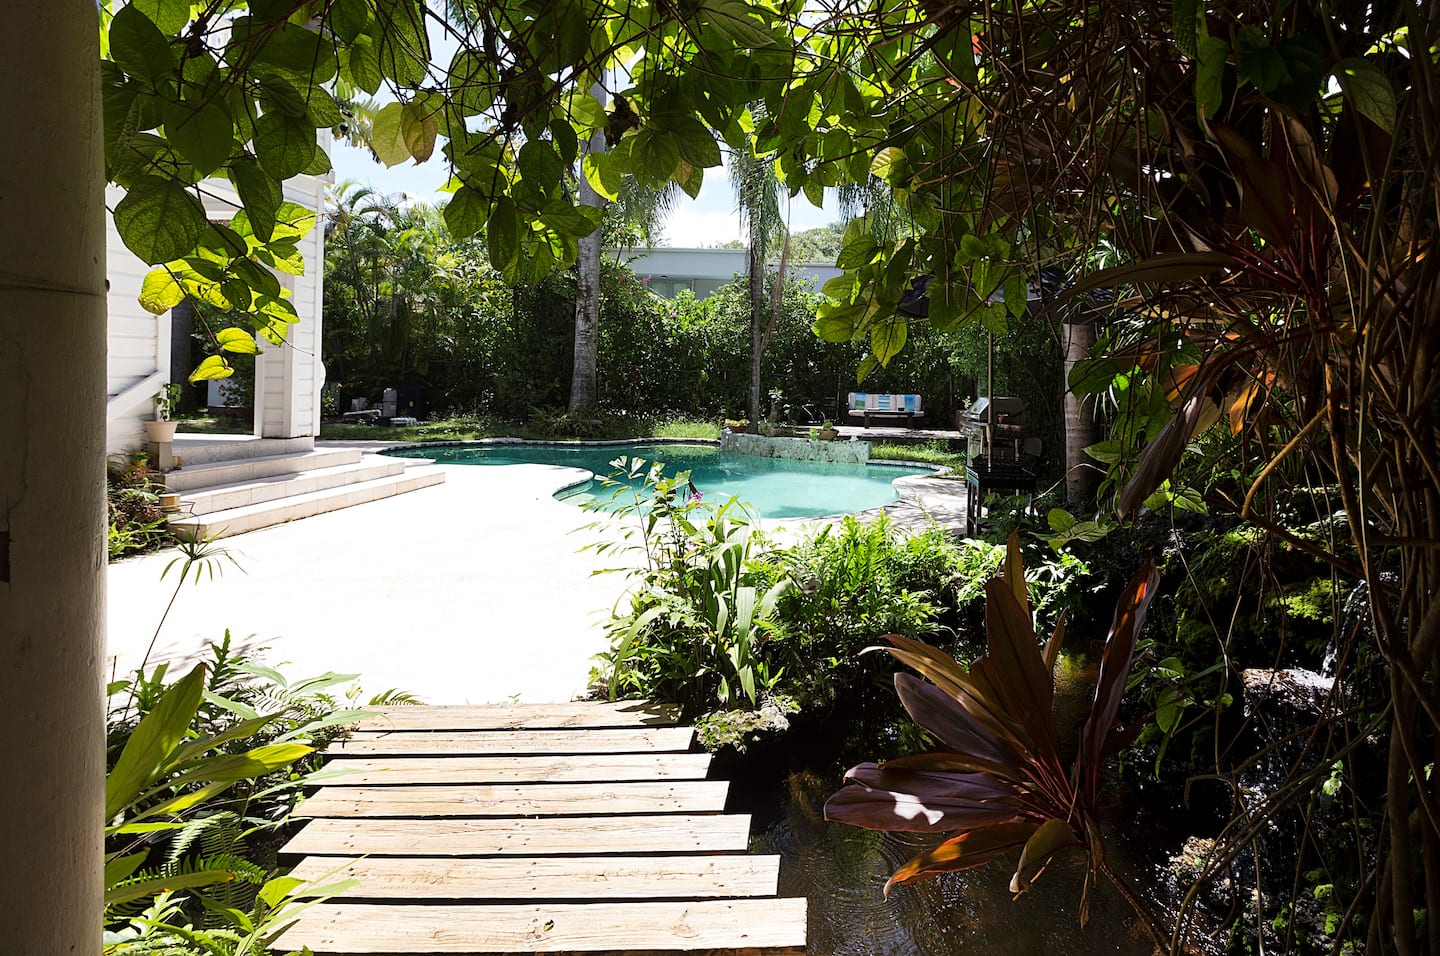 Coconut grove cottage, one of the best Airbnbs in Miami Florida